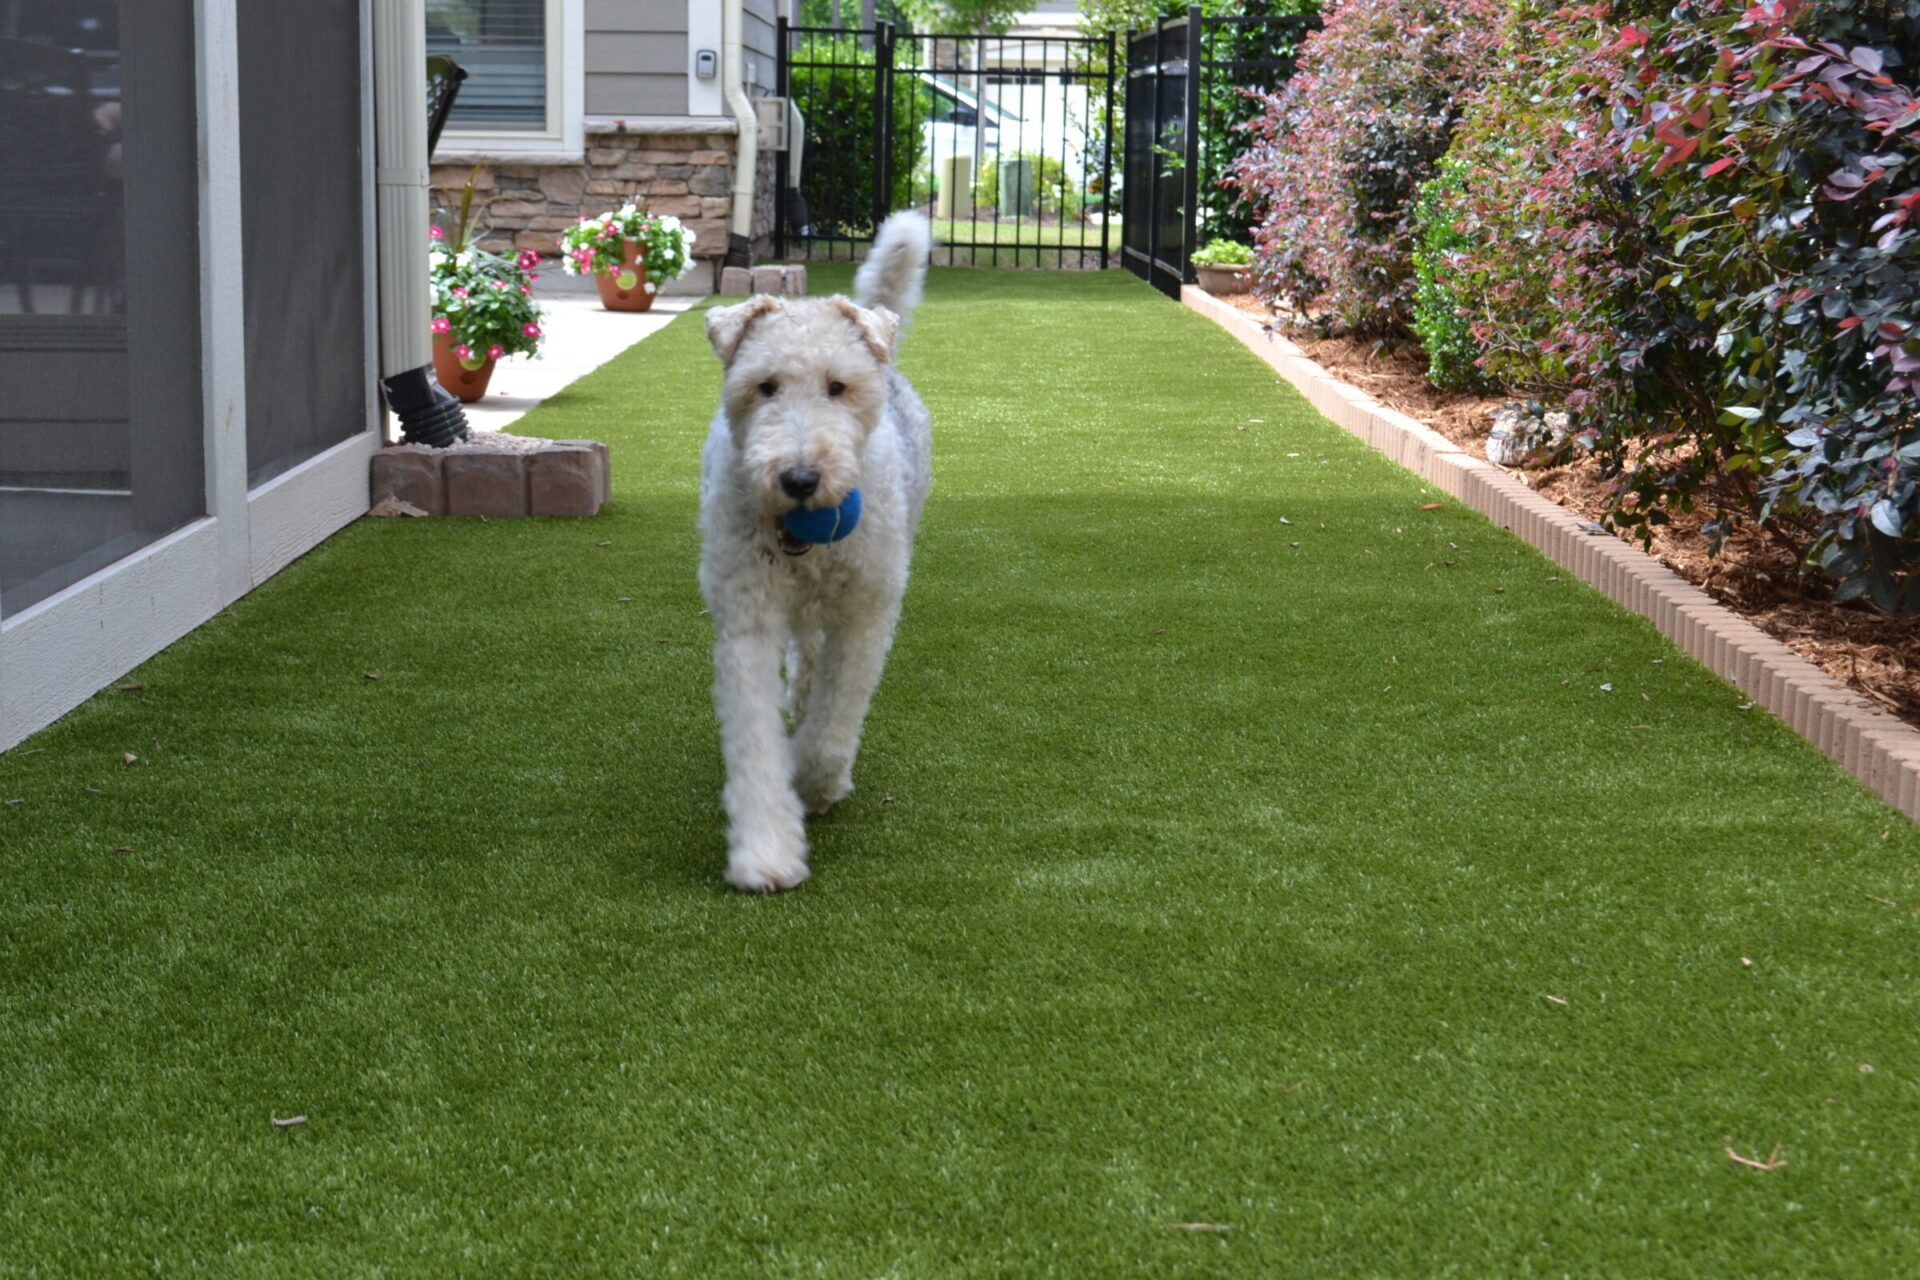 A happy dog with a blue ball in its mouth trots across a manicured artificial lawn bordered by flowering plants and a residential backdrop.